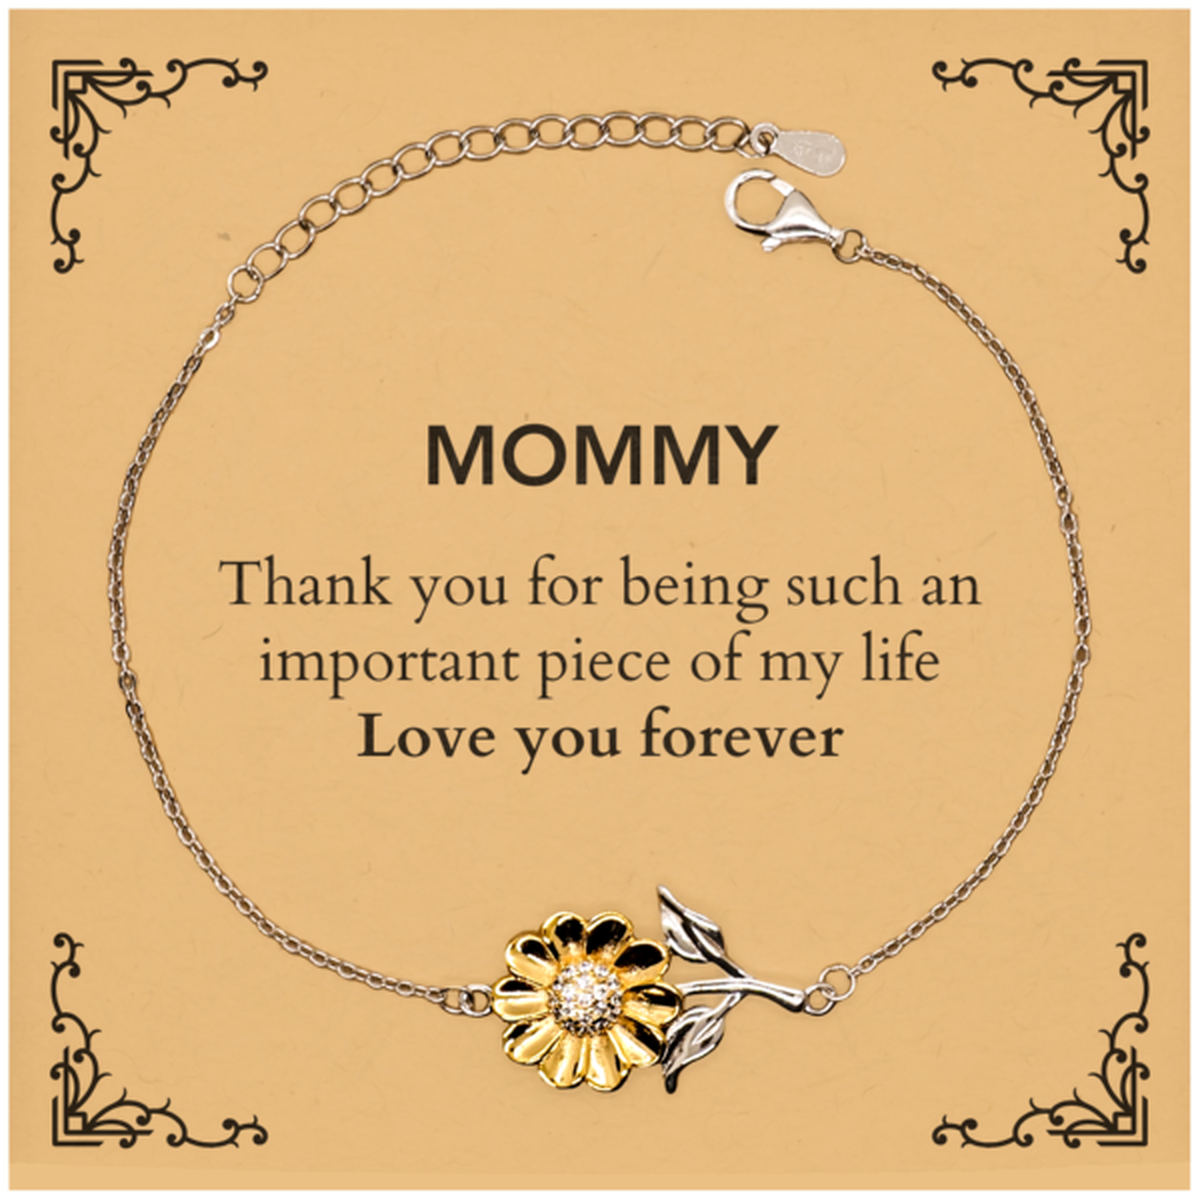 Appropriate Mommy Sunflower Bracelet Epic Birthday Gifts for Mommy Thank you for being such an important piece of my life Mommy Christmas Mothers Fathers Day